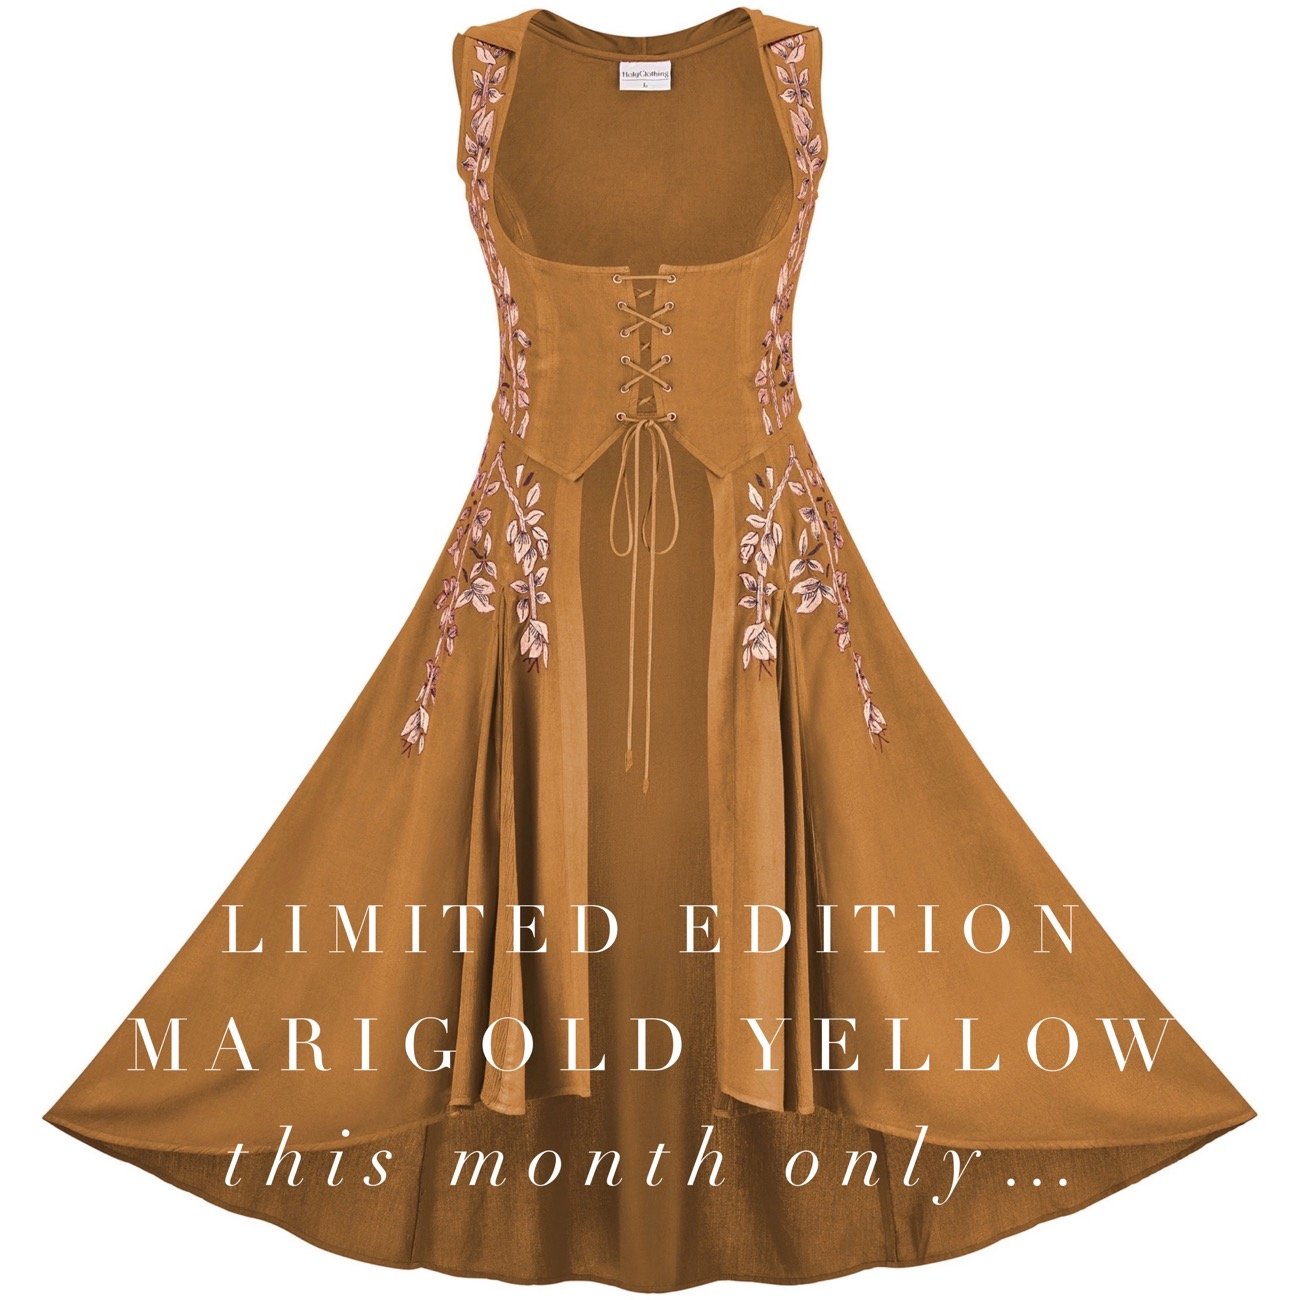 Limited Edition Marigold Yellow